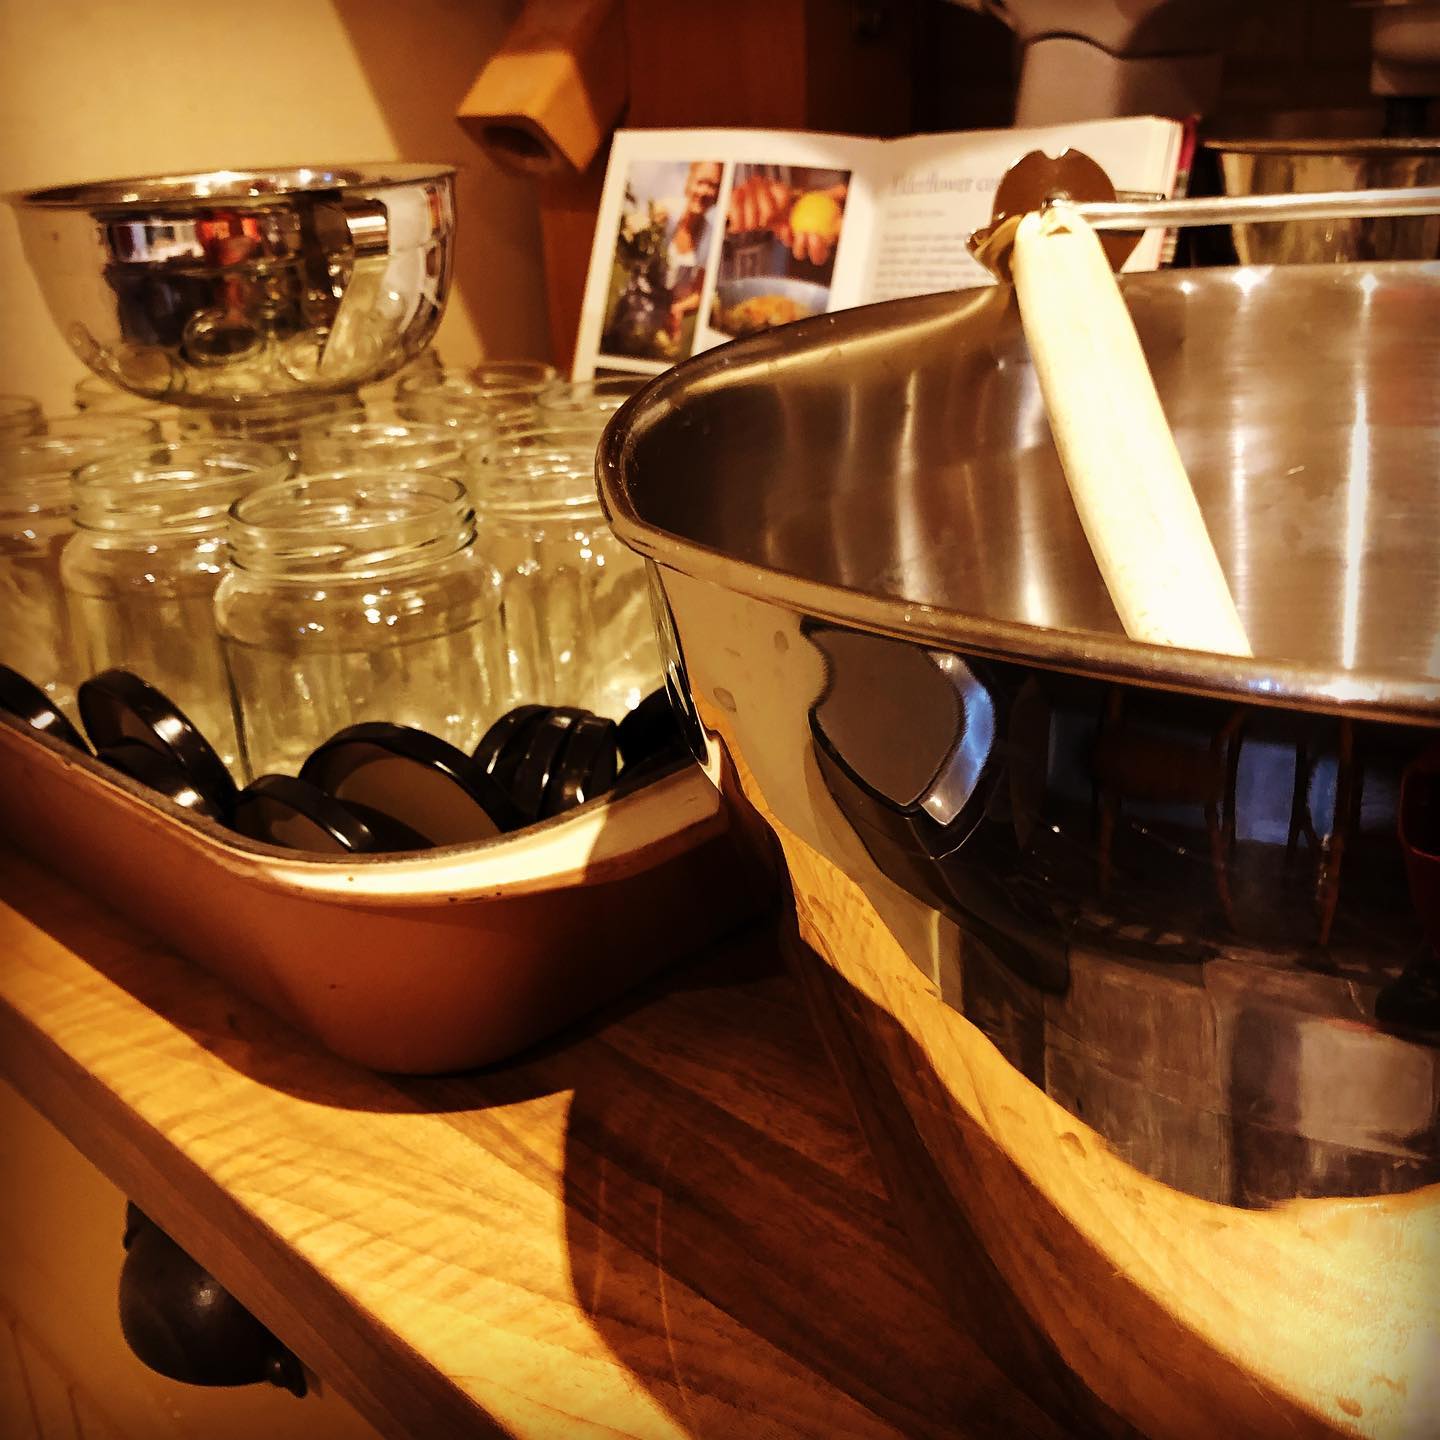 Our first guests to join us on the ‘Living the Good Life: A Working Weekend at The Lint Mill’ course (link in bio) have elected to try preserve making. Gooseberries are ripening and preparations are being made. #gooseberryjam #thegoodlife #workingweekend #practicallearning @sawdaystravel